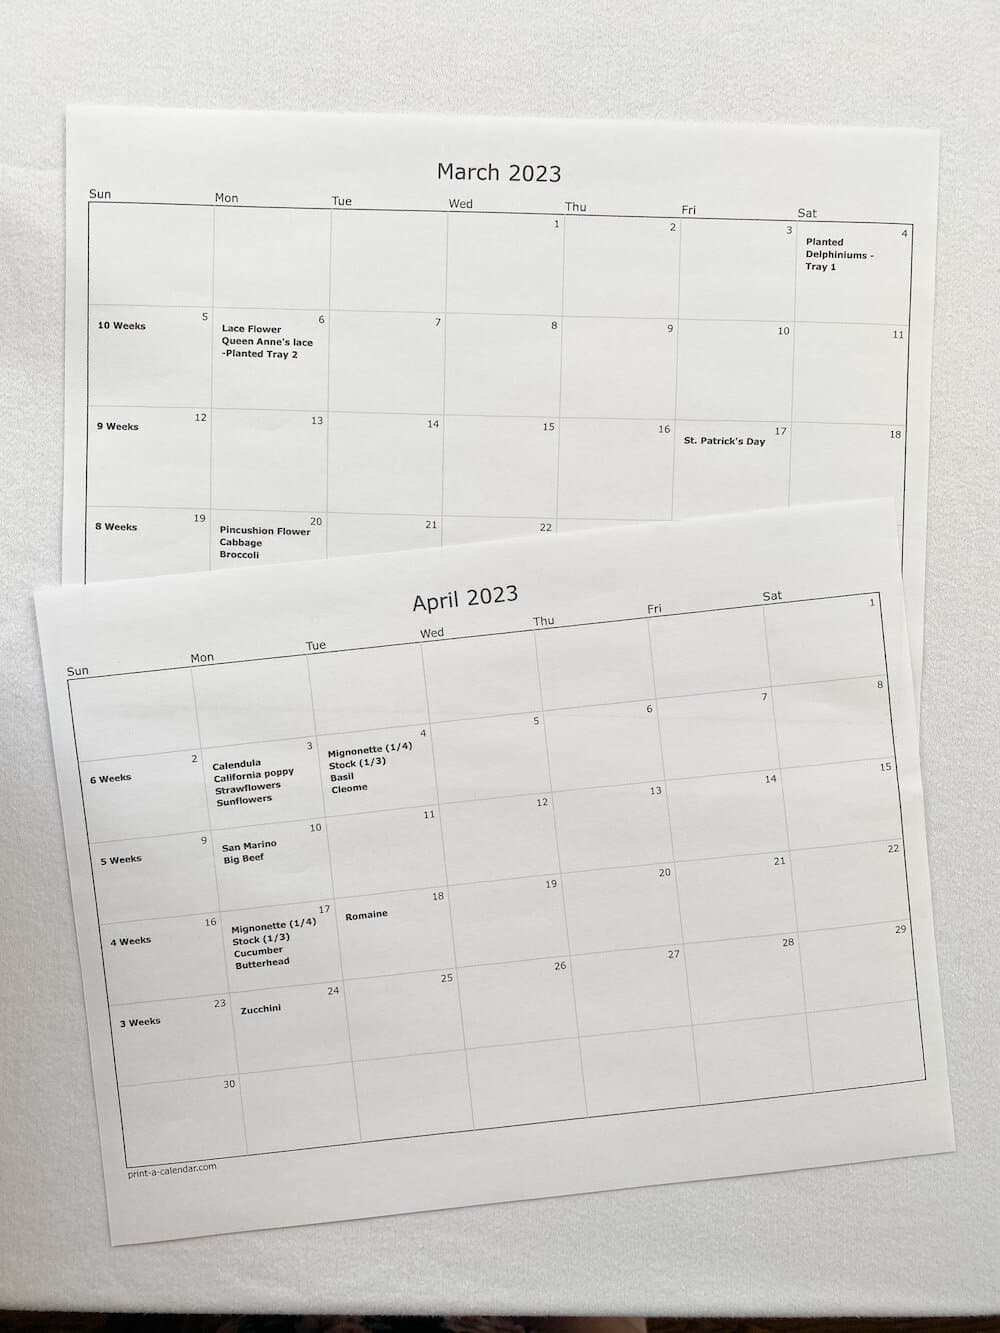 picture of my calendar plotting out when I'm starting plants from seeds